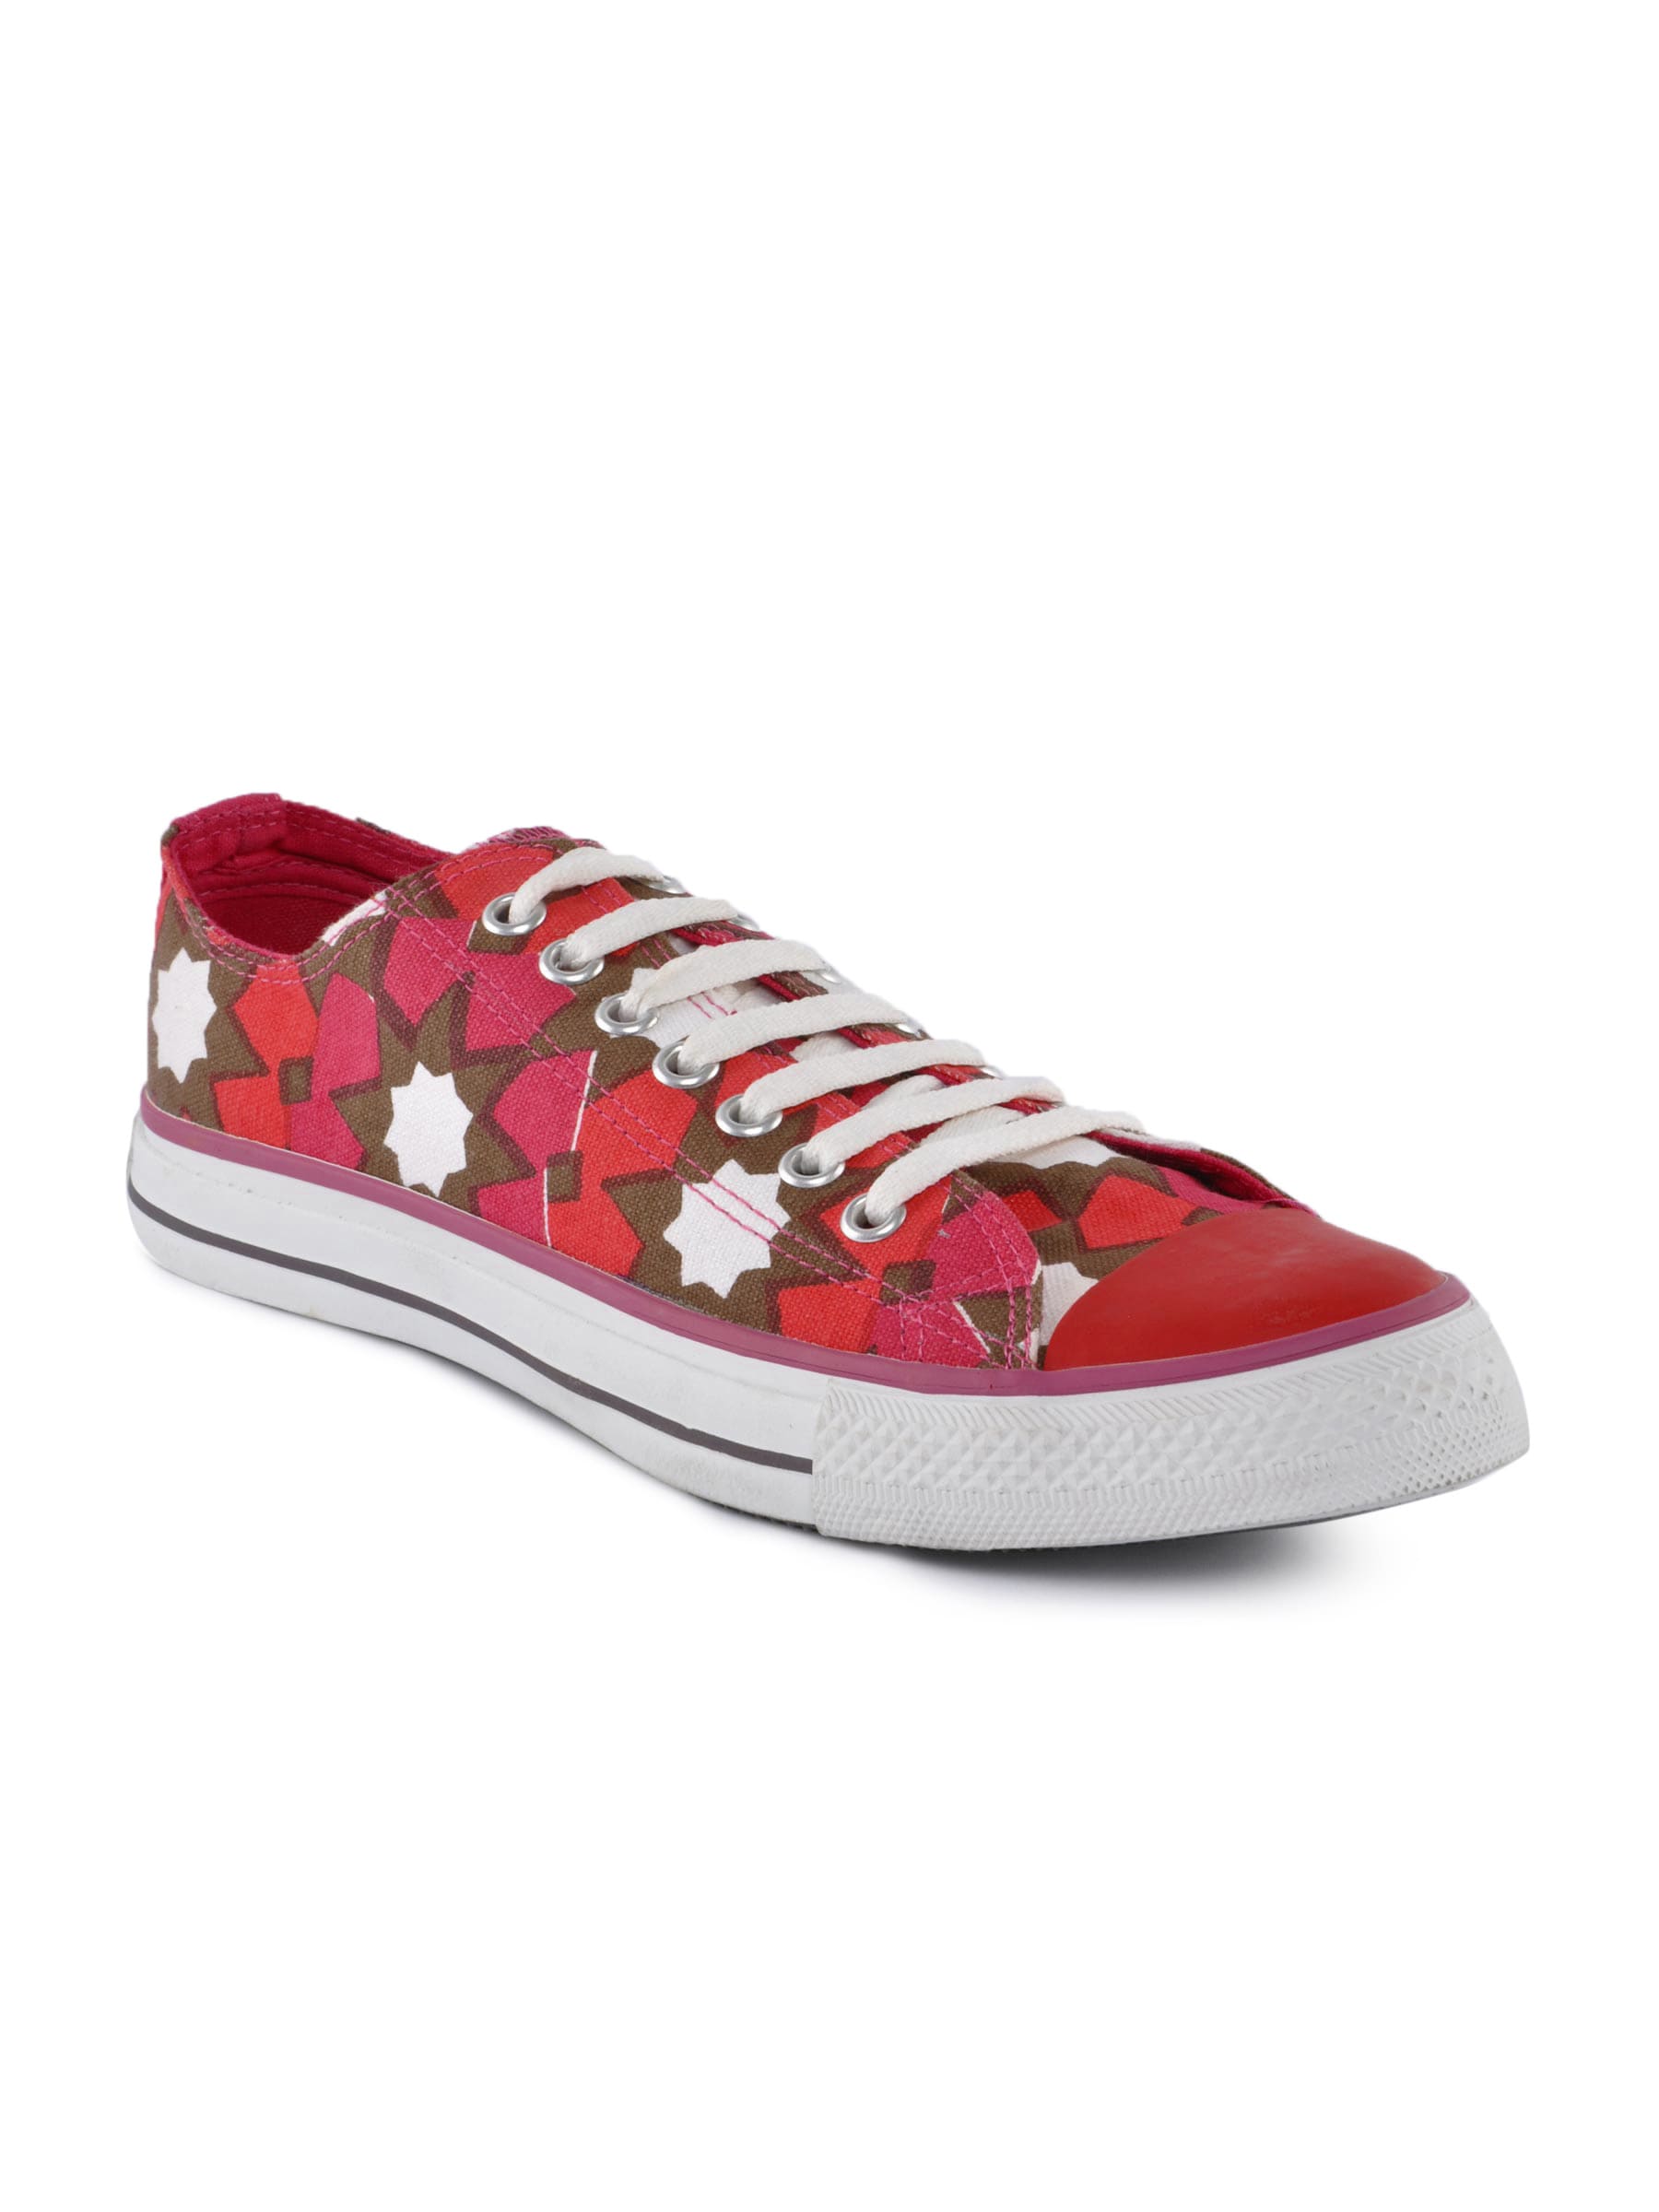 Converse Unisex  Floral Print Red Casual Shoes